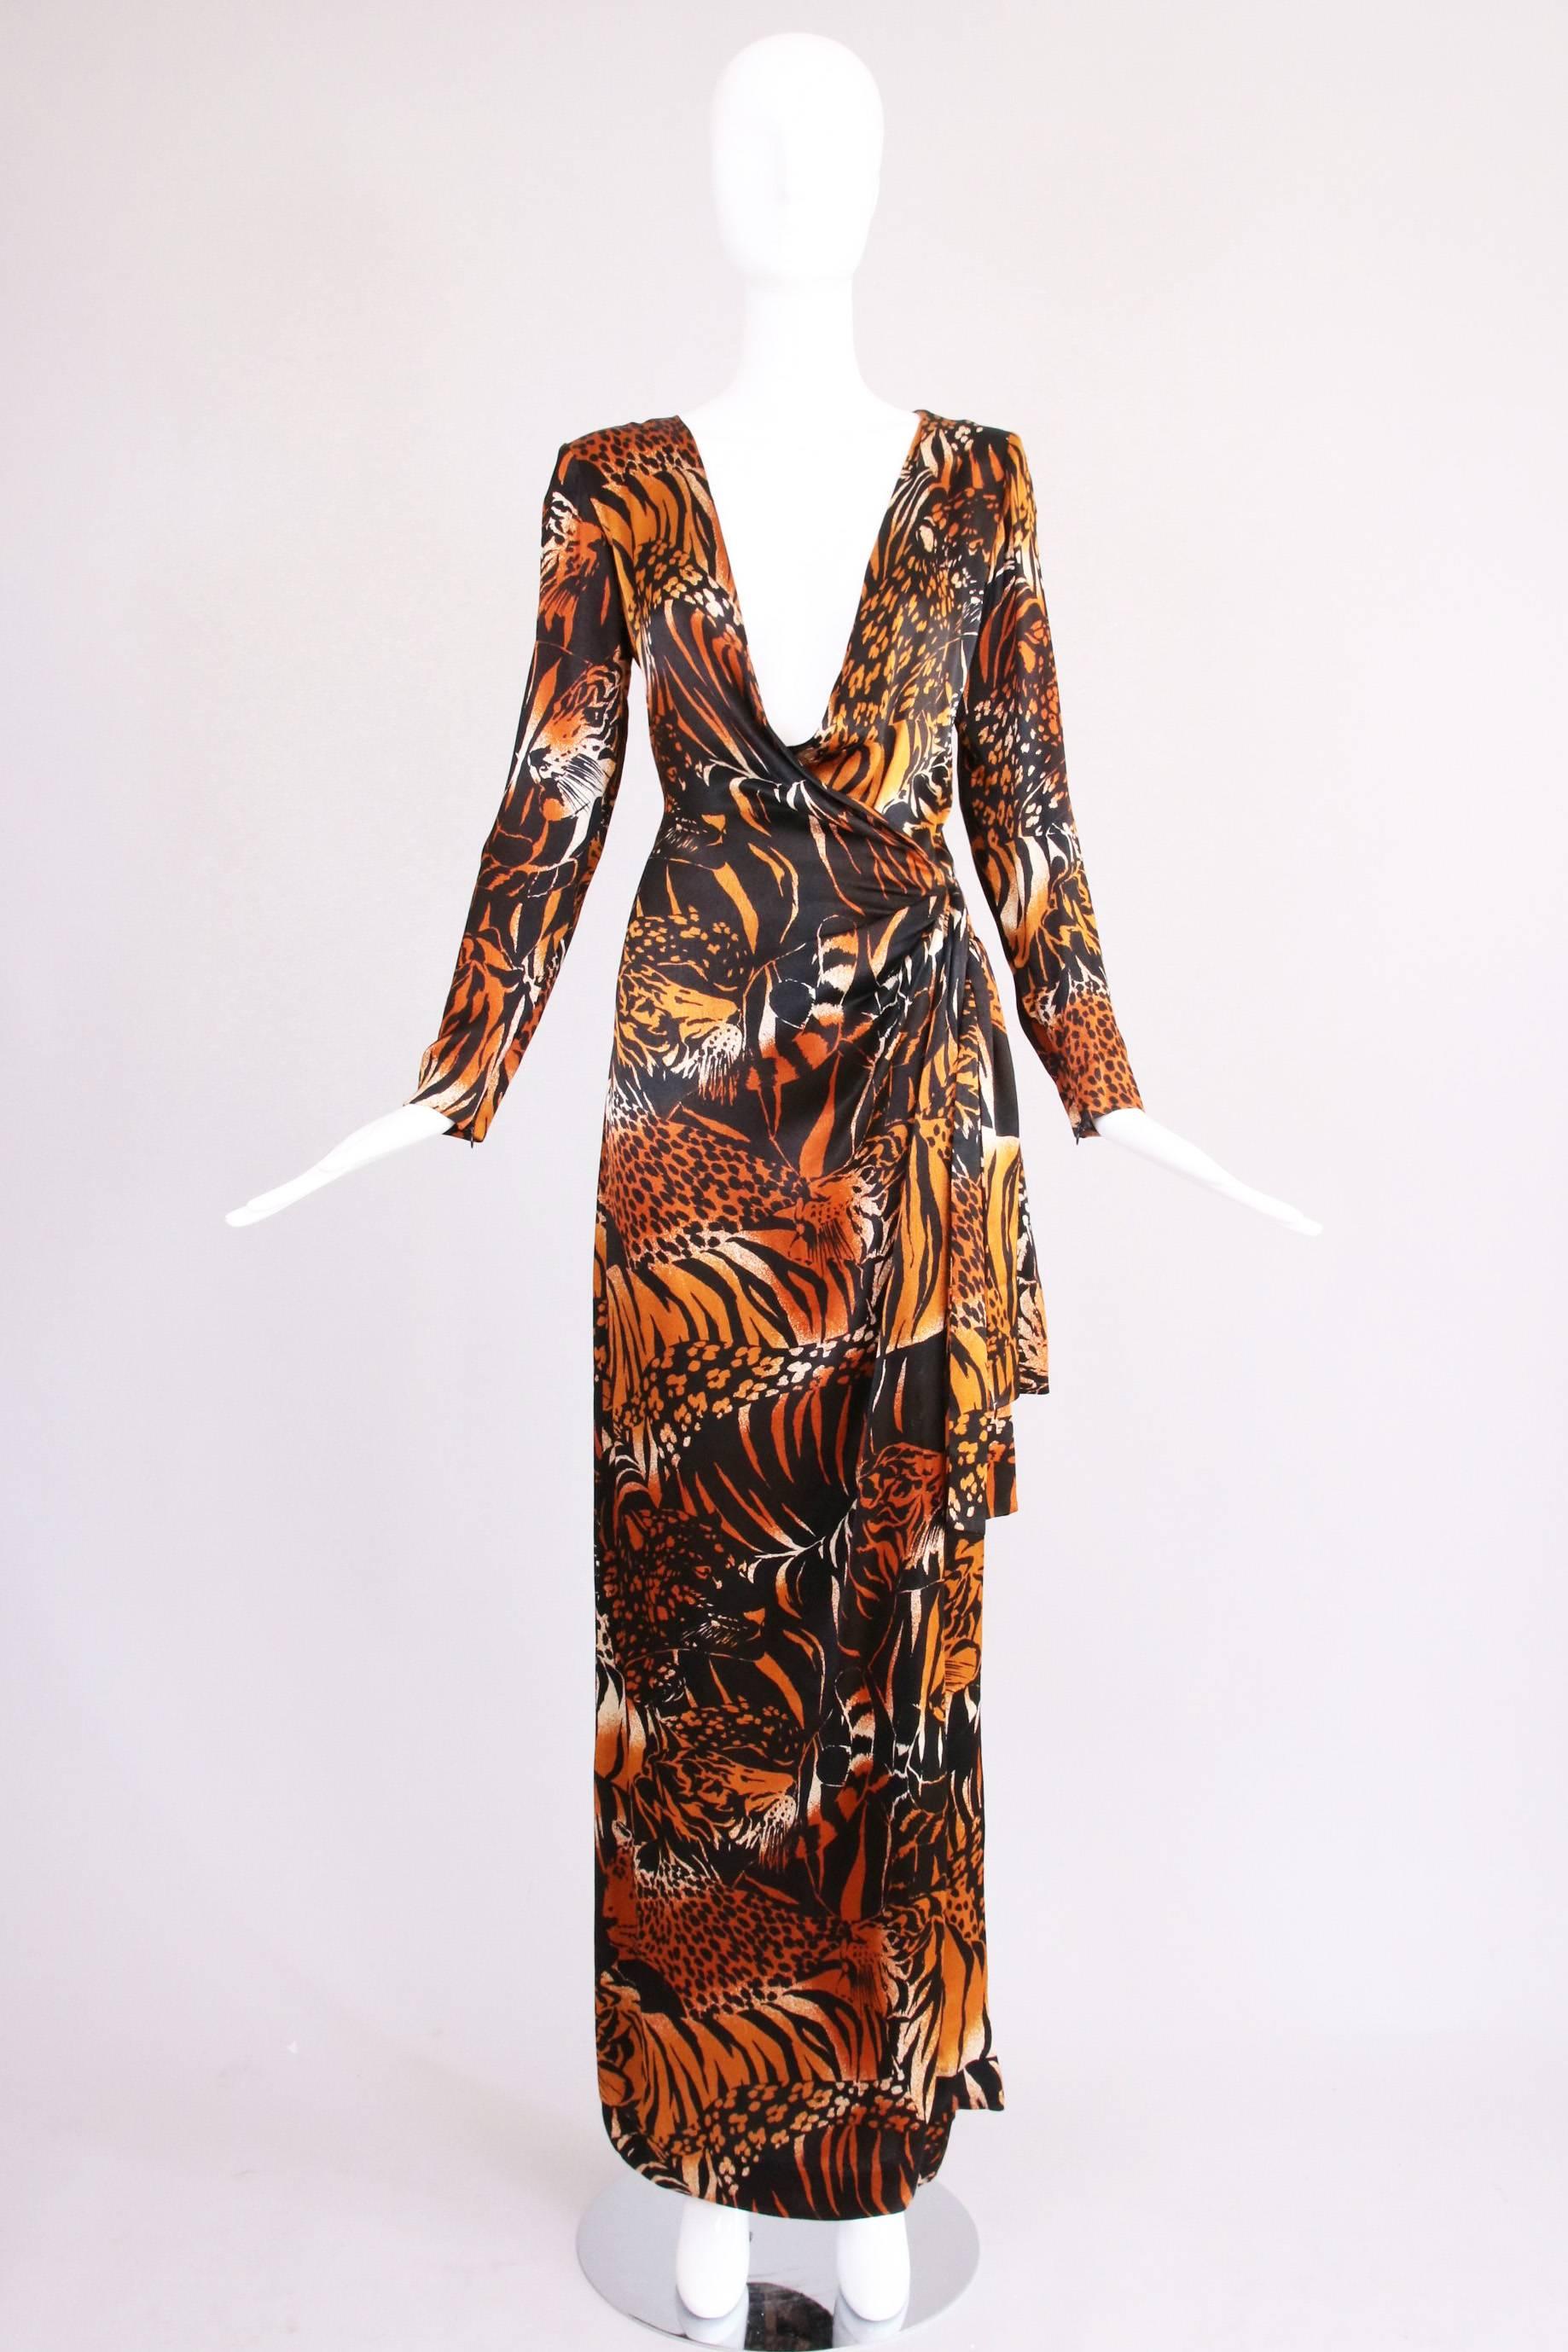 Vintage Yves Saint Laurent silk leopard print wrap evening gown with deep v-neck plunge and decorative half-sash at the hip. Size 38. In excellent condition.
MEASUREMENTS:
Waist - 26